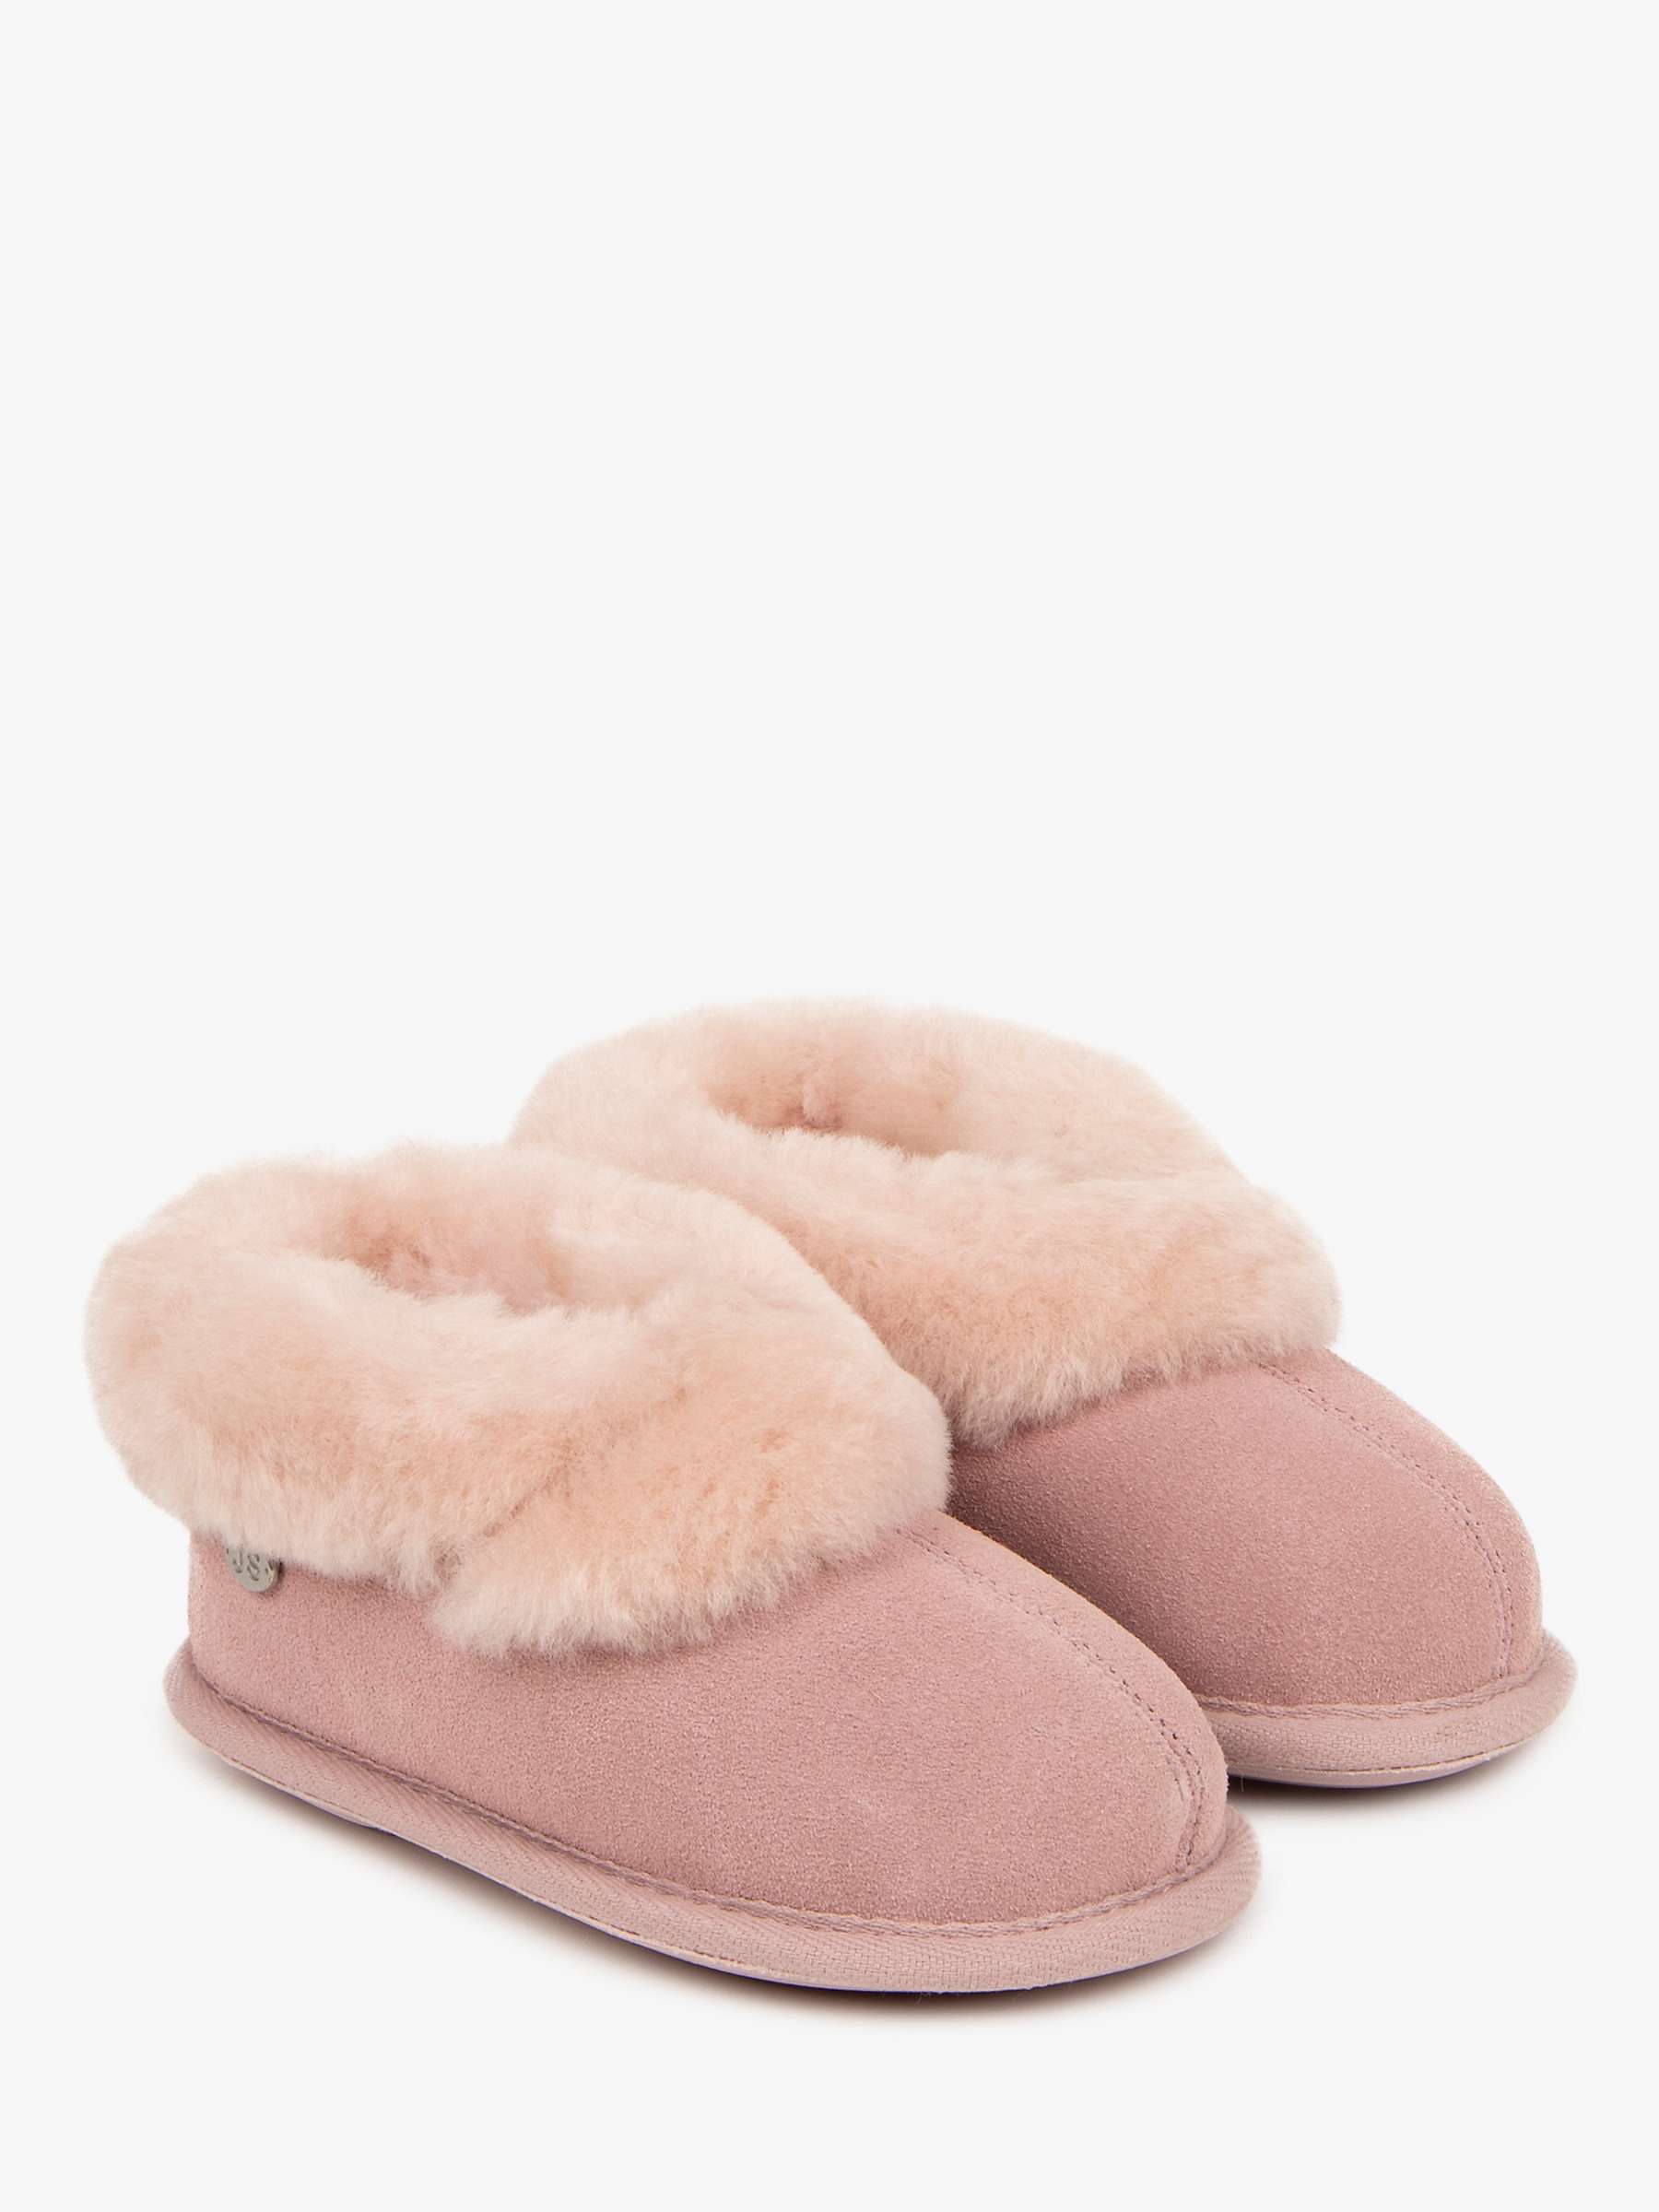 Buy Just Sheepskin Kids' Classic Slippers Online at johnlewis.com